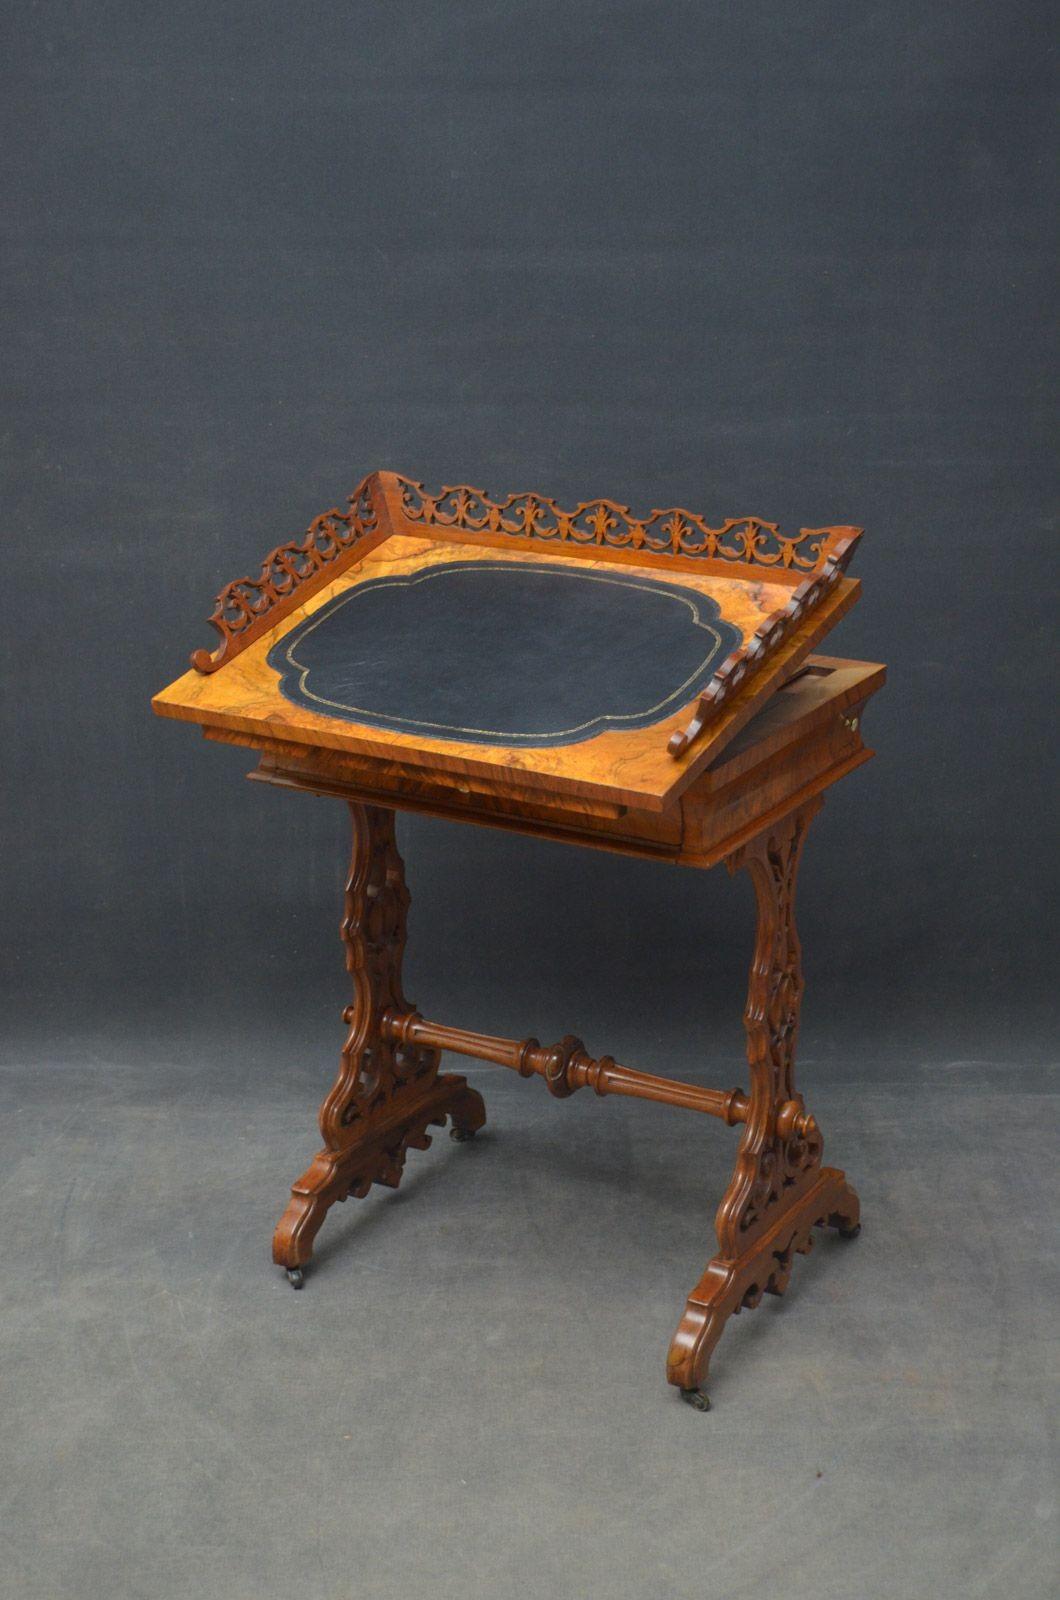 Sn4628 Unusual 19th century figured walnut writing table with side drawer, having fretwork gallery and leather writing surface to the top, above a concave drawer and chess and backgammon board, standing on finely carved supports united by turned